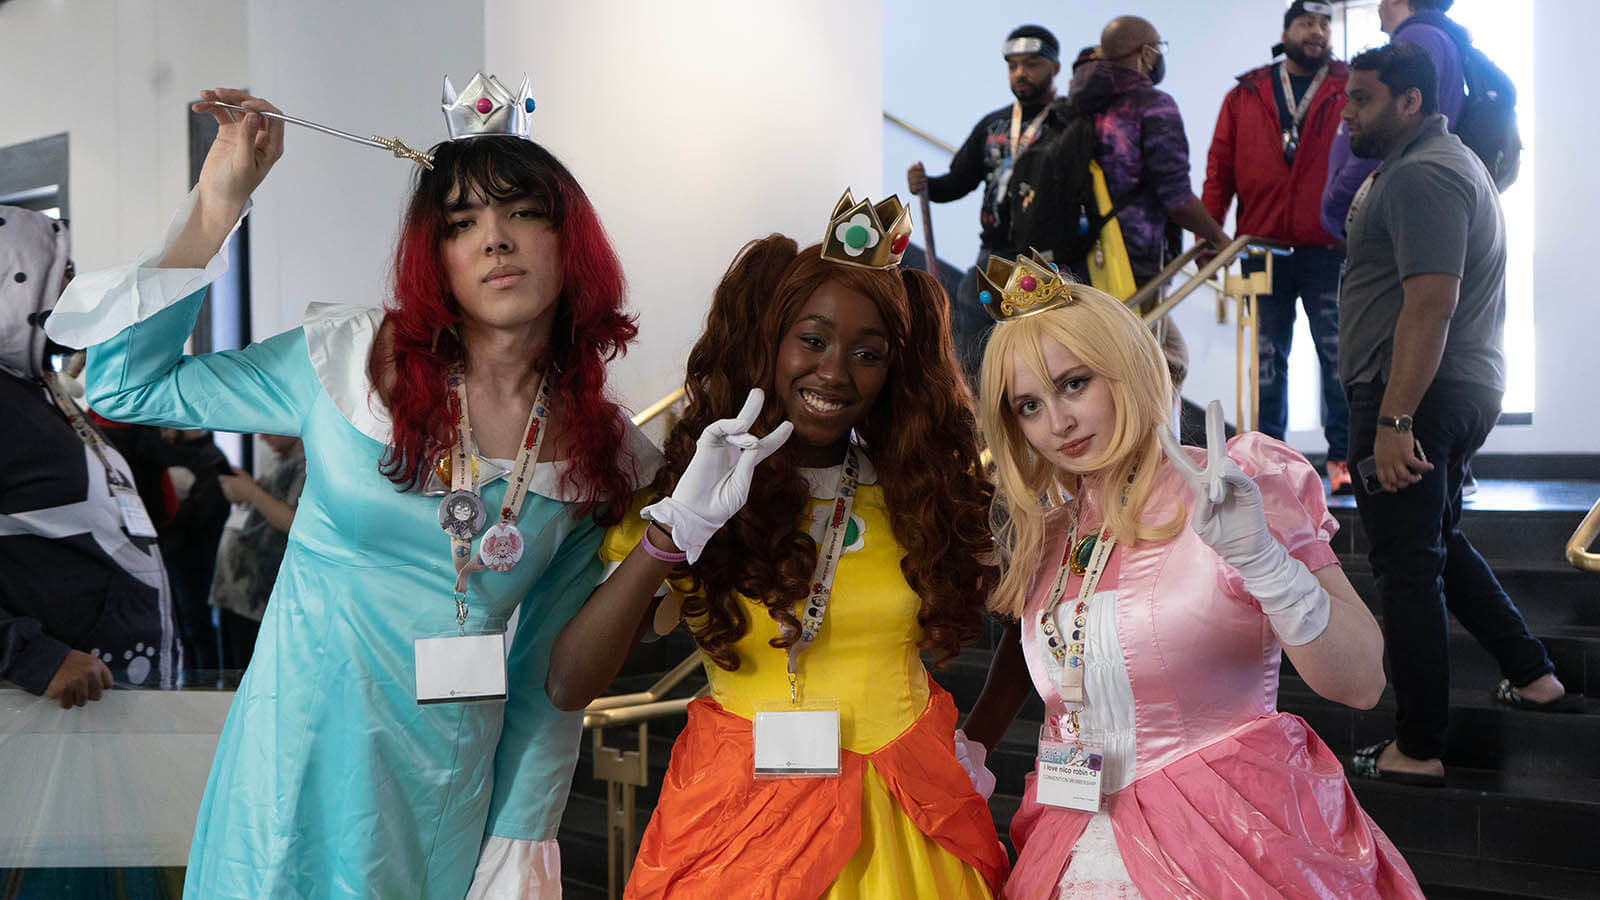 I've Seen Some Things: A Weekend in the Life of An Anime Boston 2014  Attendee | The Daily Geekette